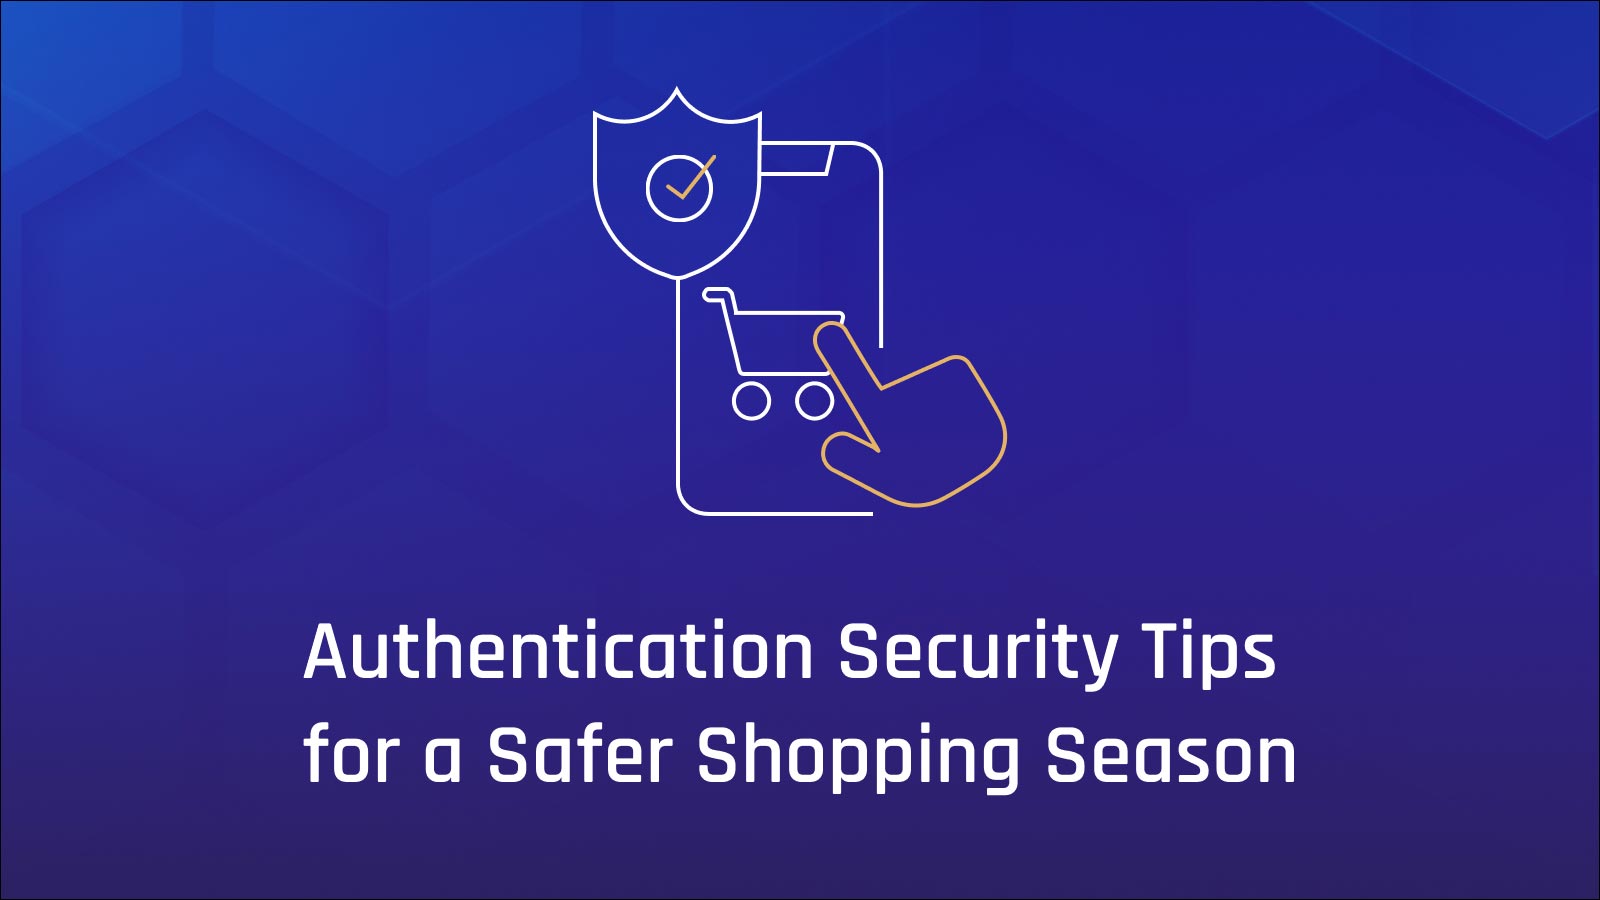 Customer Authentication Tips for Safer Shopping